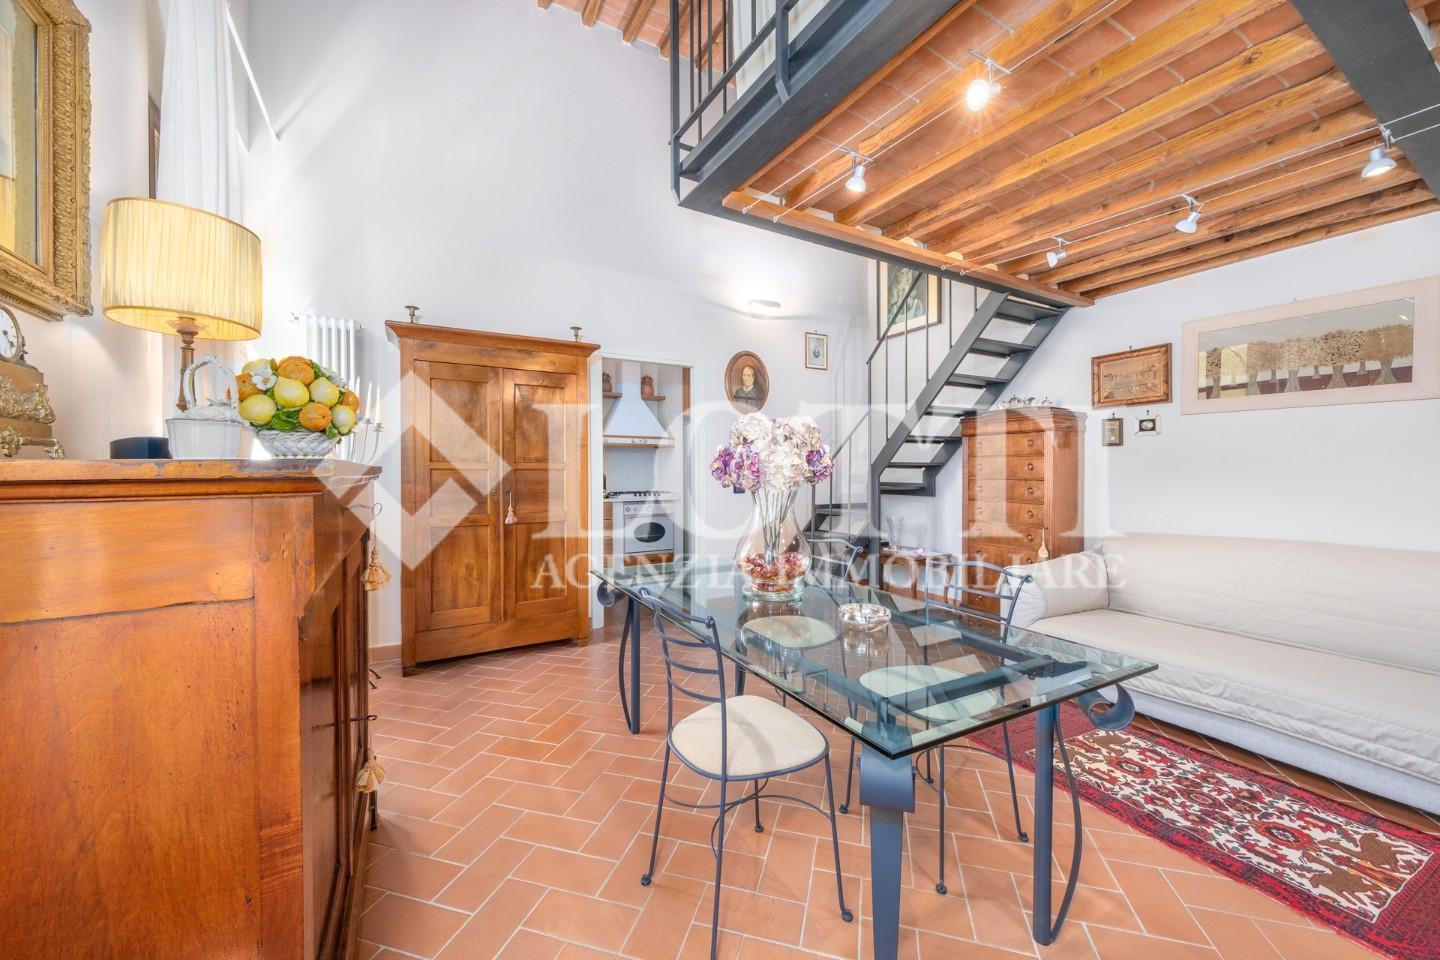 Apartment for sale, ref. 833